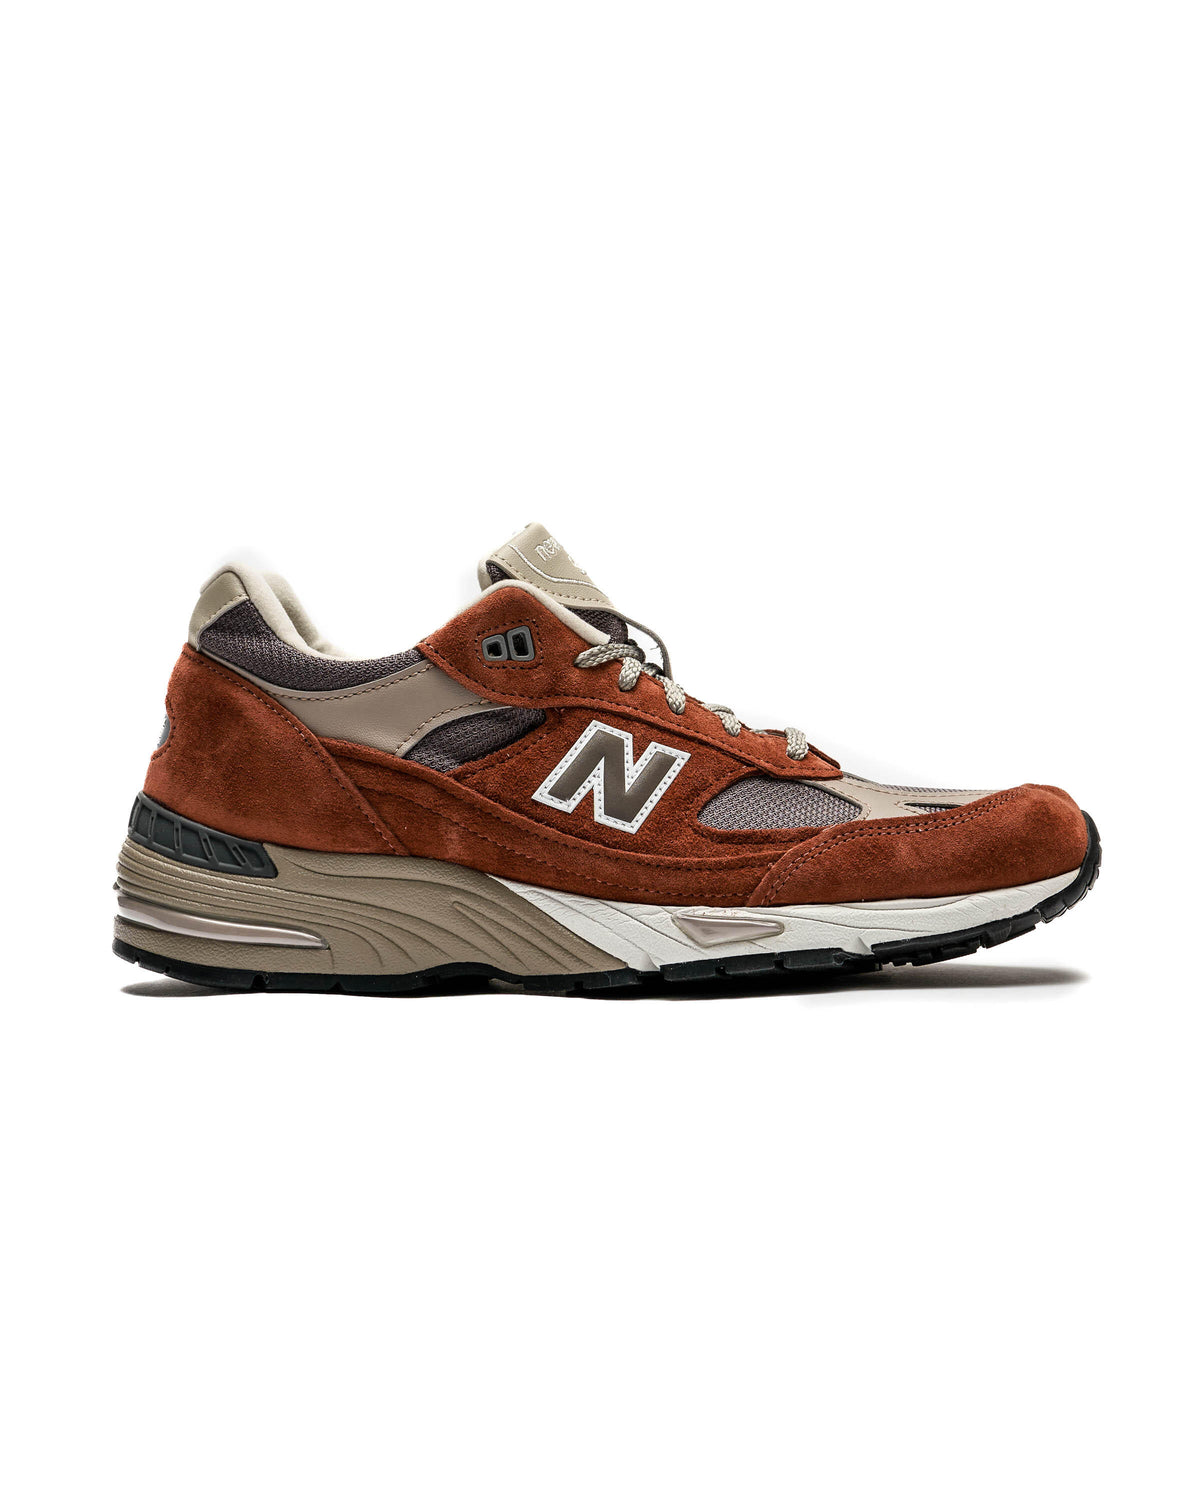 New Balance M 991 PTY - Made in England